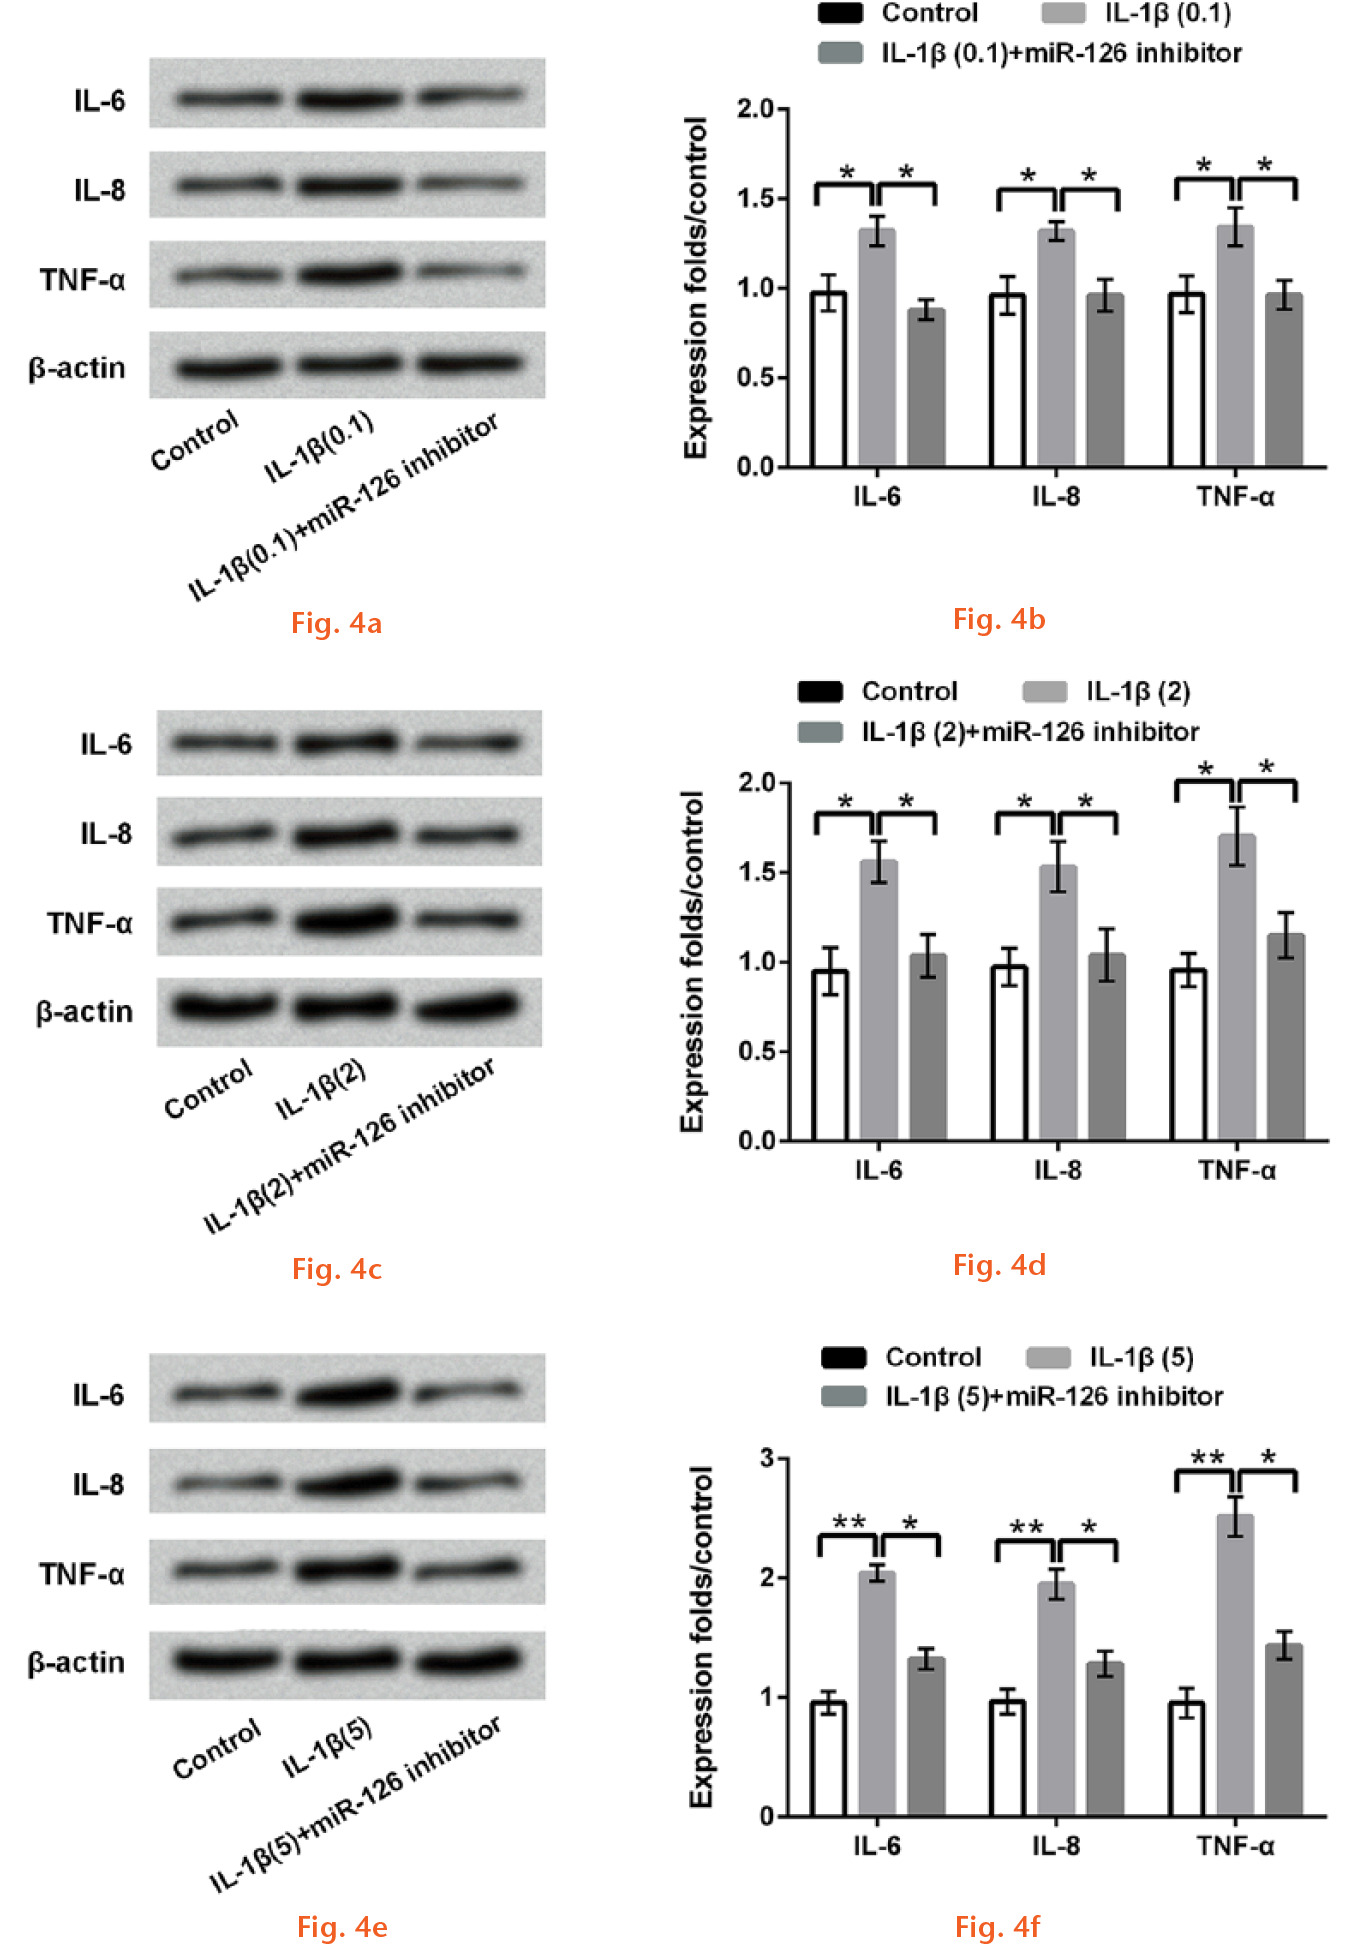  
            Inhibition of miR-126 reduced the expression levels of pro-inflammatory factors in interleukin (IL)-1β-injured CHON-001 cells. The human chondrocyte cell line CHON-001 was administrated by IL-1β (0.1 ng/ml, 2 ng/ml, 5 ng/ml, or 10 ng/ml) and/or miR-126 inhibitor transfection. a), c), and e) The protein immunoblots of pro-inflammatory cytokines (IL-6, IL-8, and TNF-α) by Western blot assay. b), d), and f) Graphs showing the relative expression levels of IL-6, IL-8, and TNF-α. β-actin acted as an internal control (*p < 0.05; **p < 0.01).
          